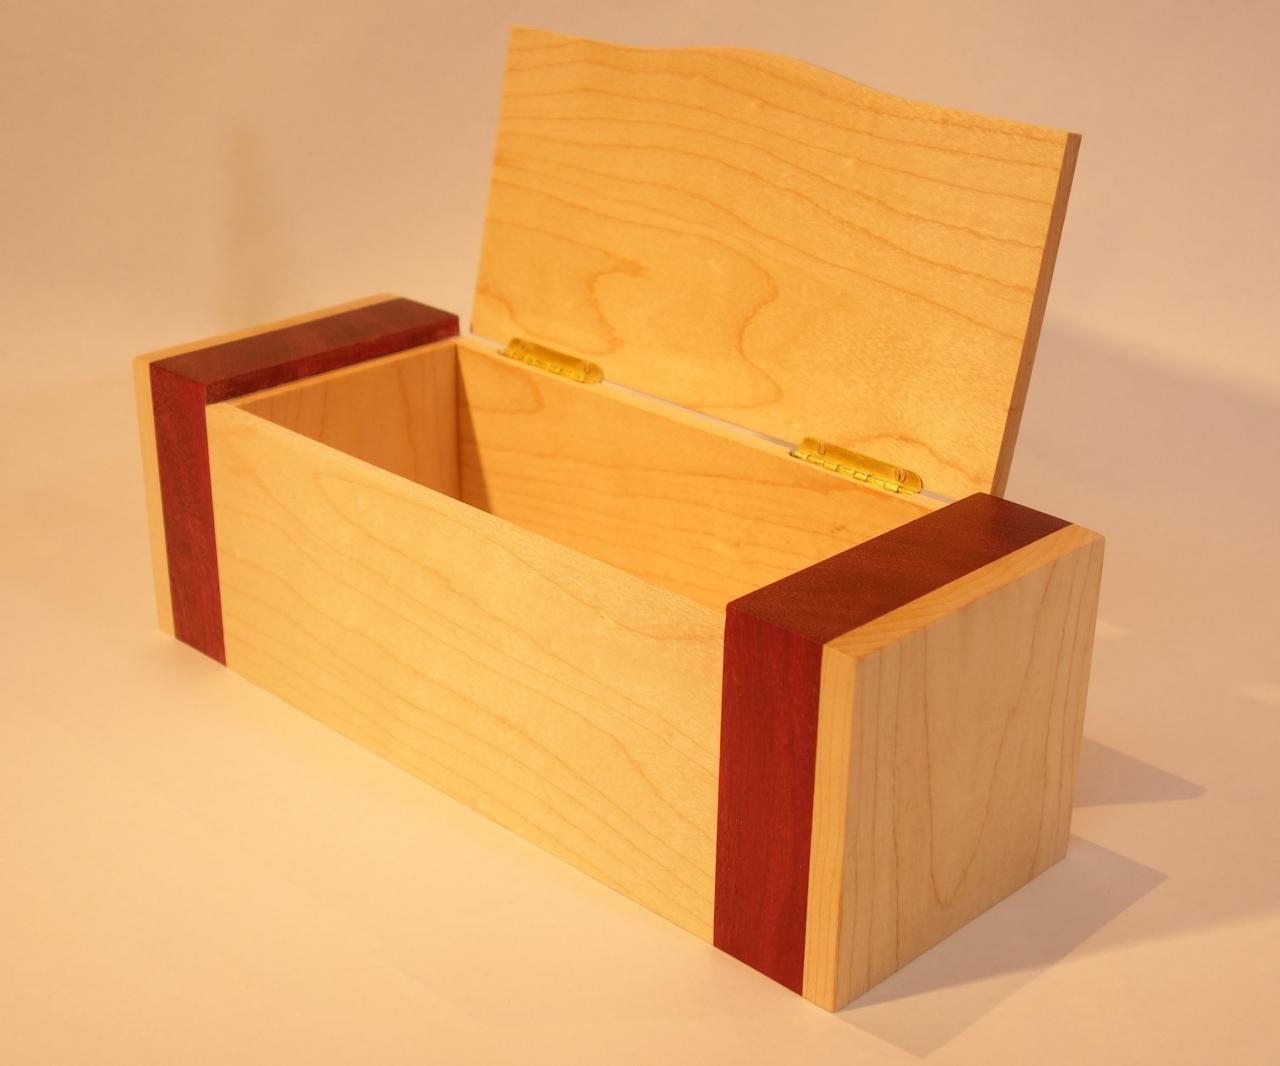 How to Secret Compartment Box I Instructables